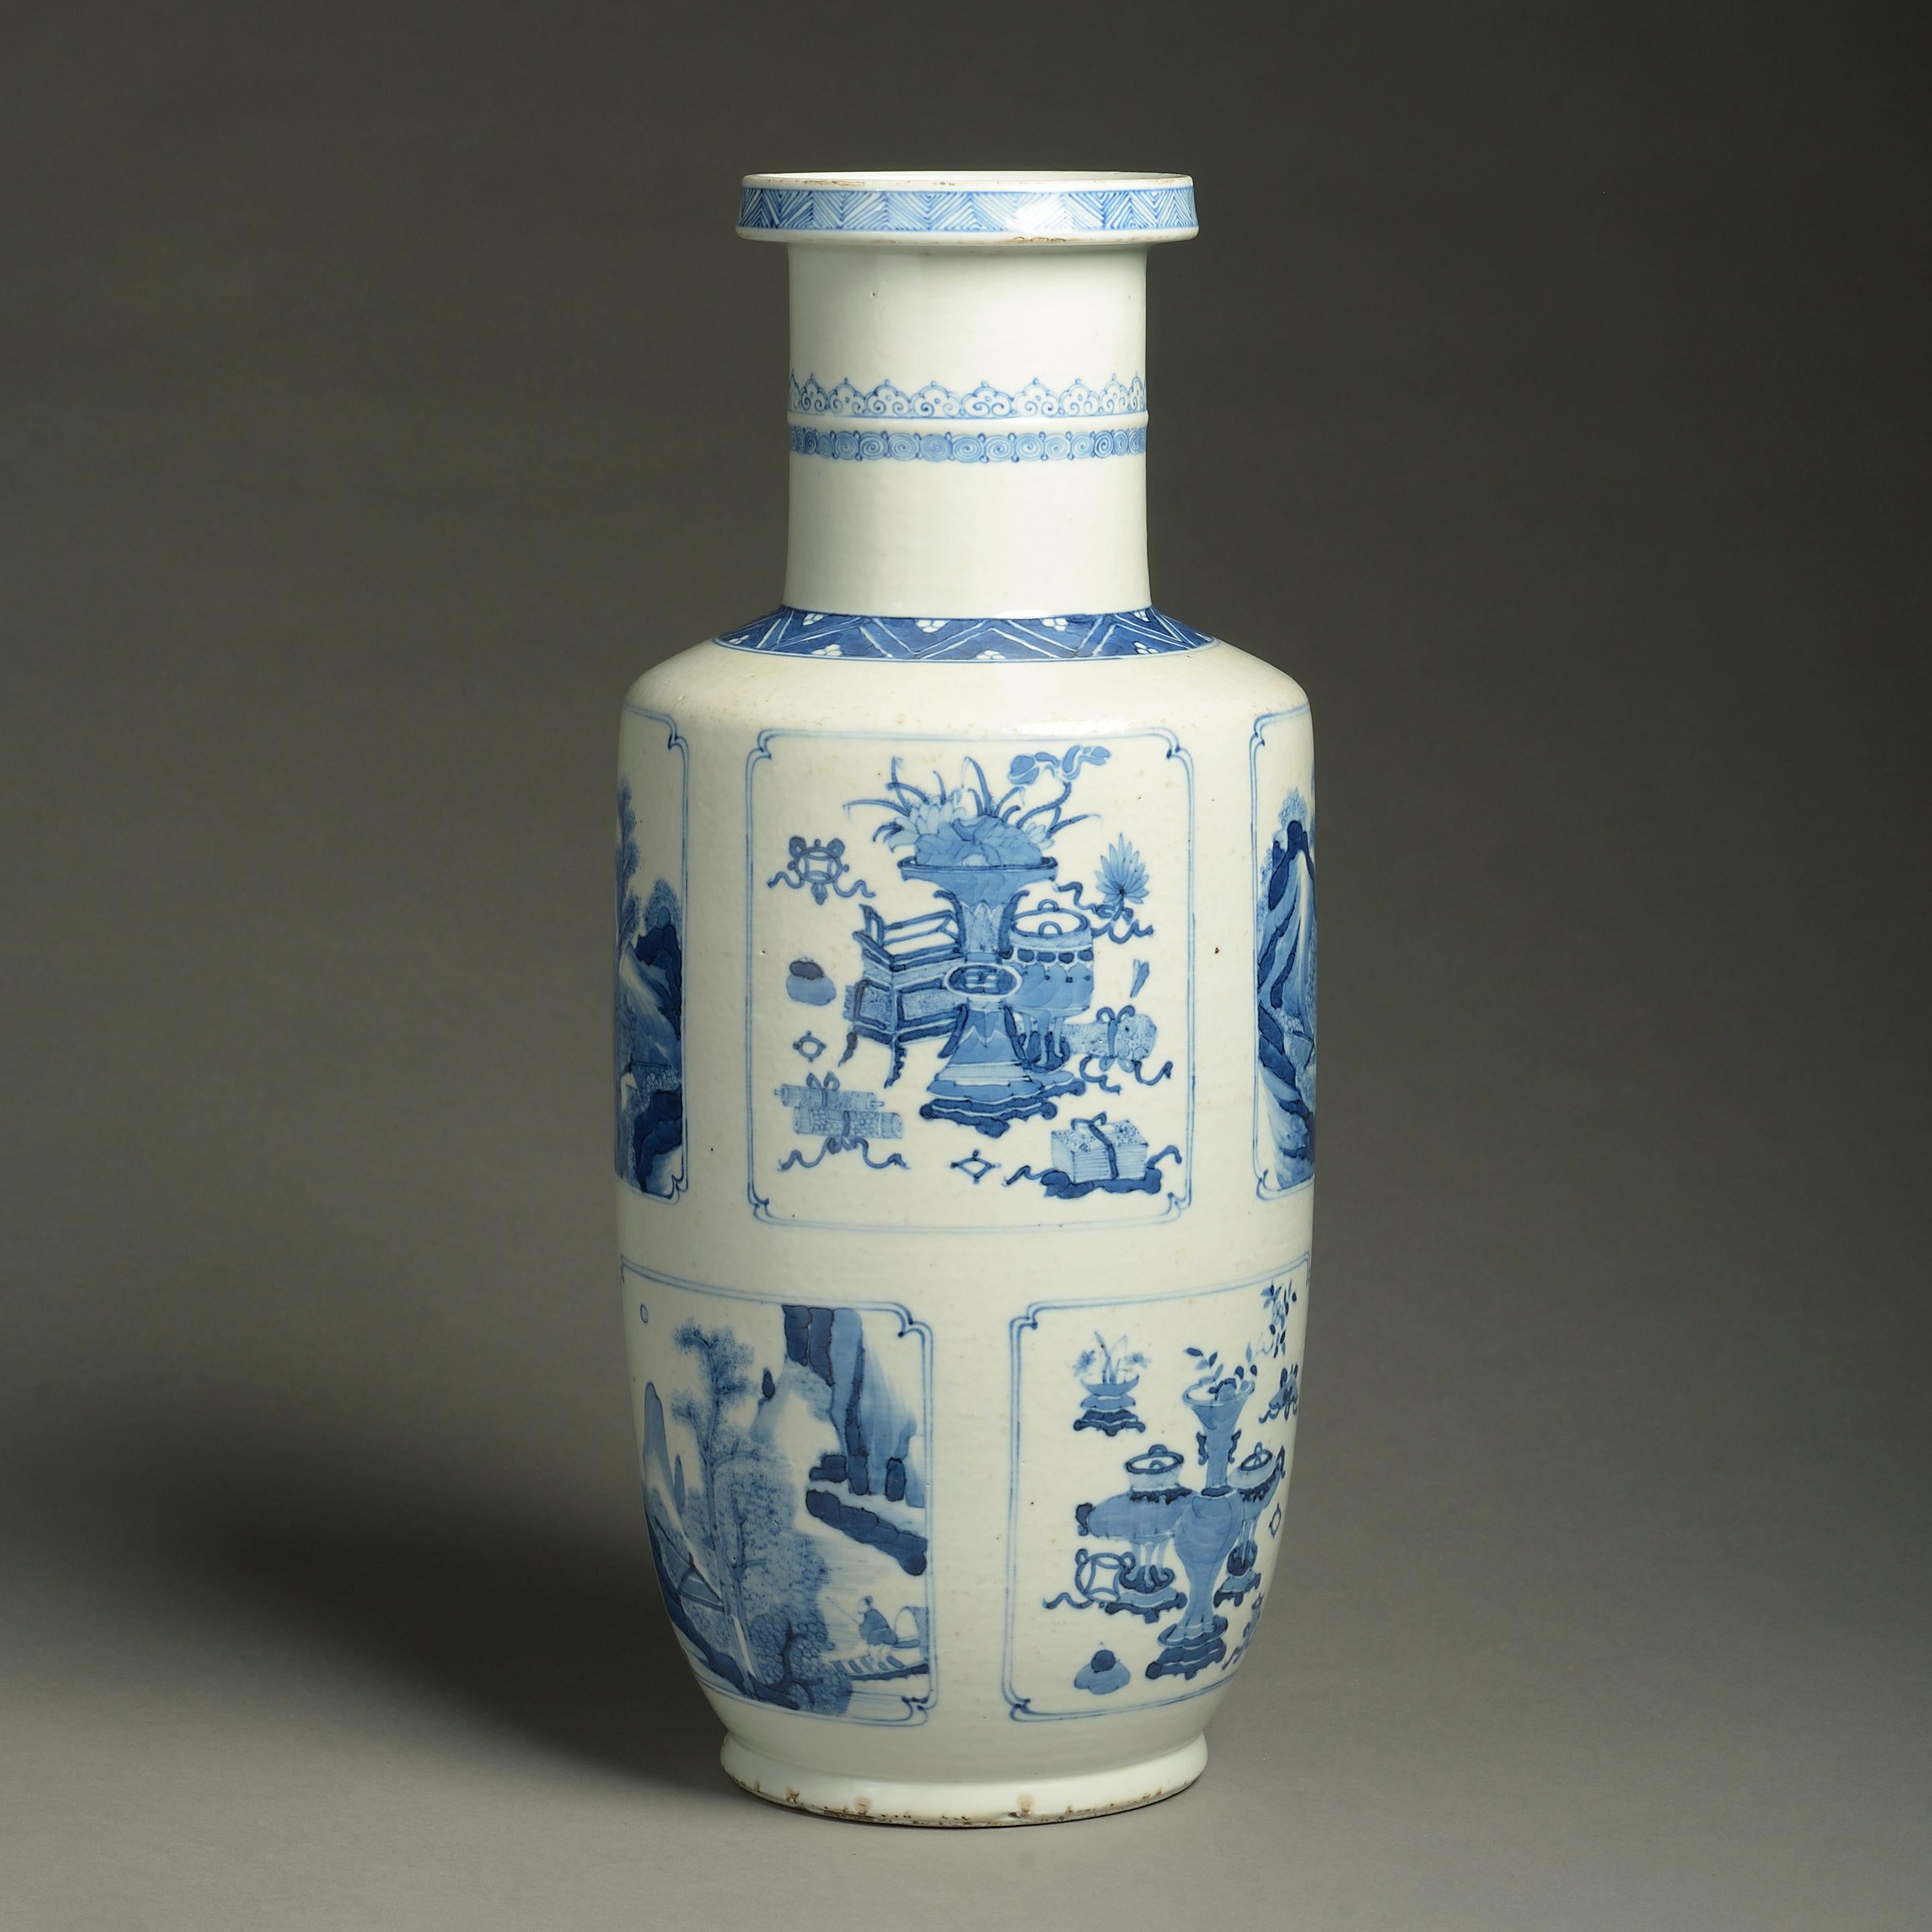 A 19th century blue and white porcelain rouleau vase, decorated throughout with panels depicting figurative scenes, landscapes and still life in the Kangxi manner. 

Late Qing dynasty.
  